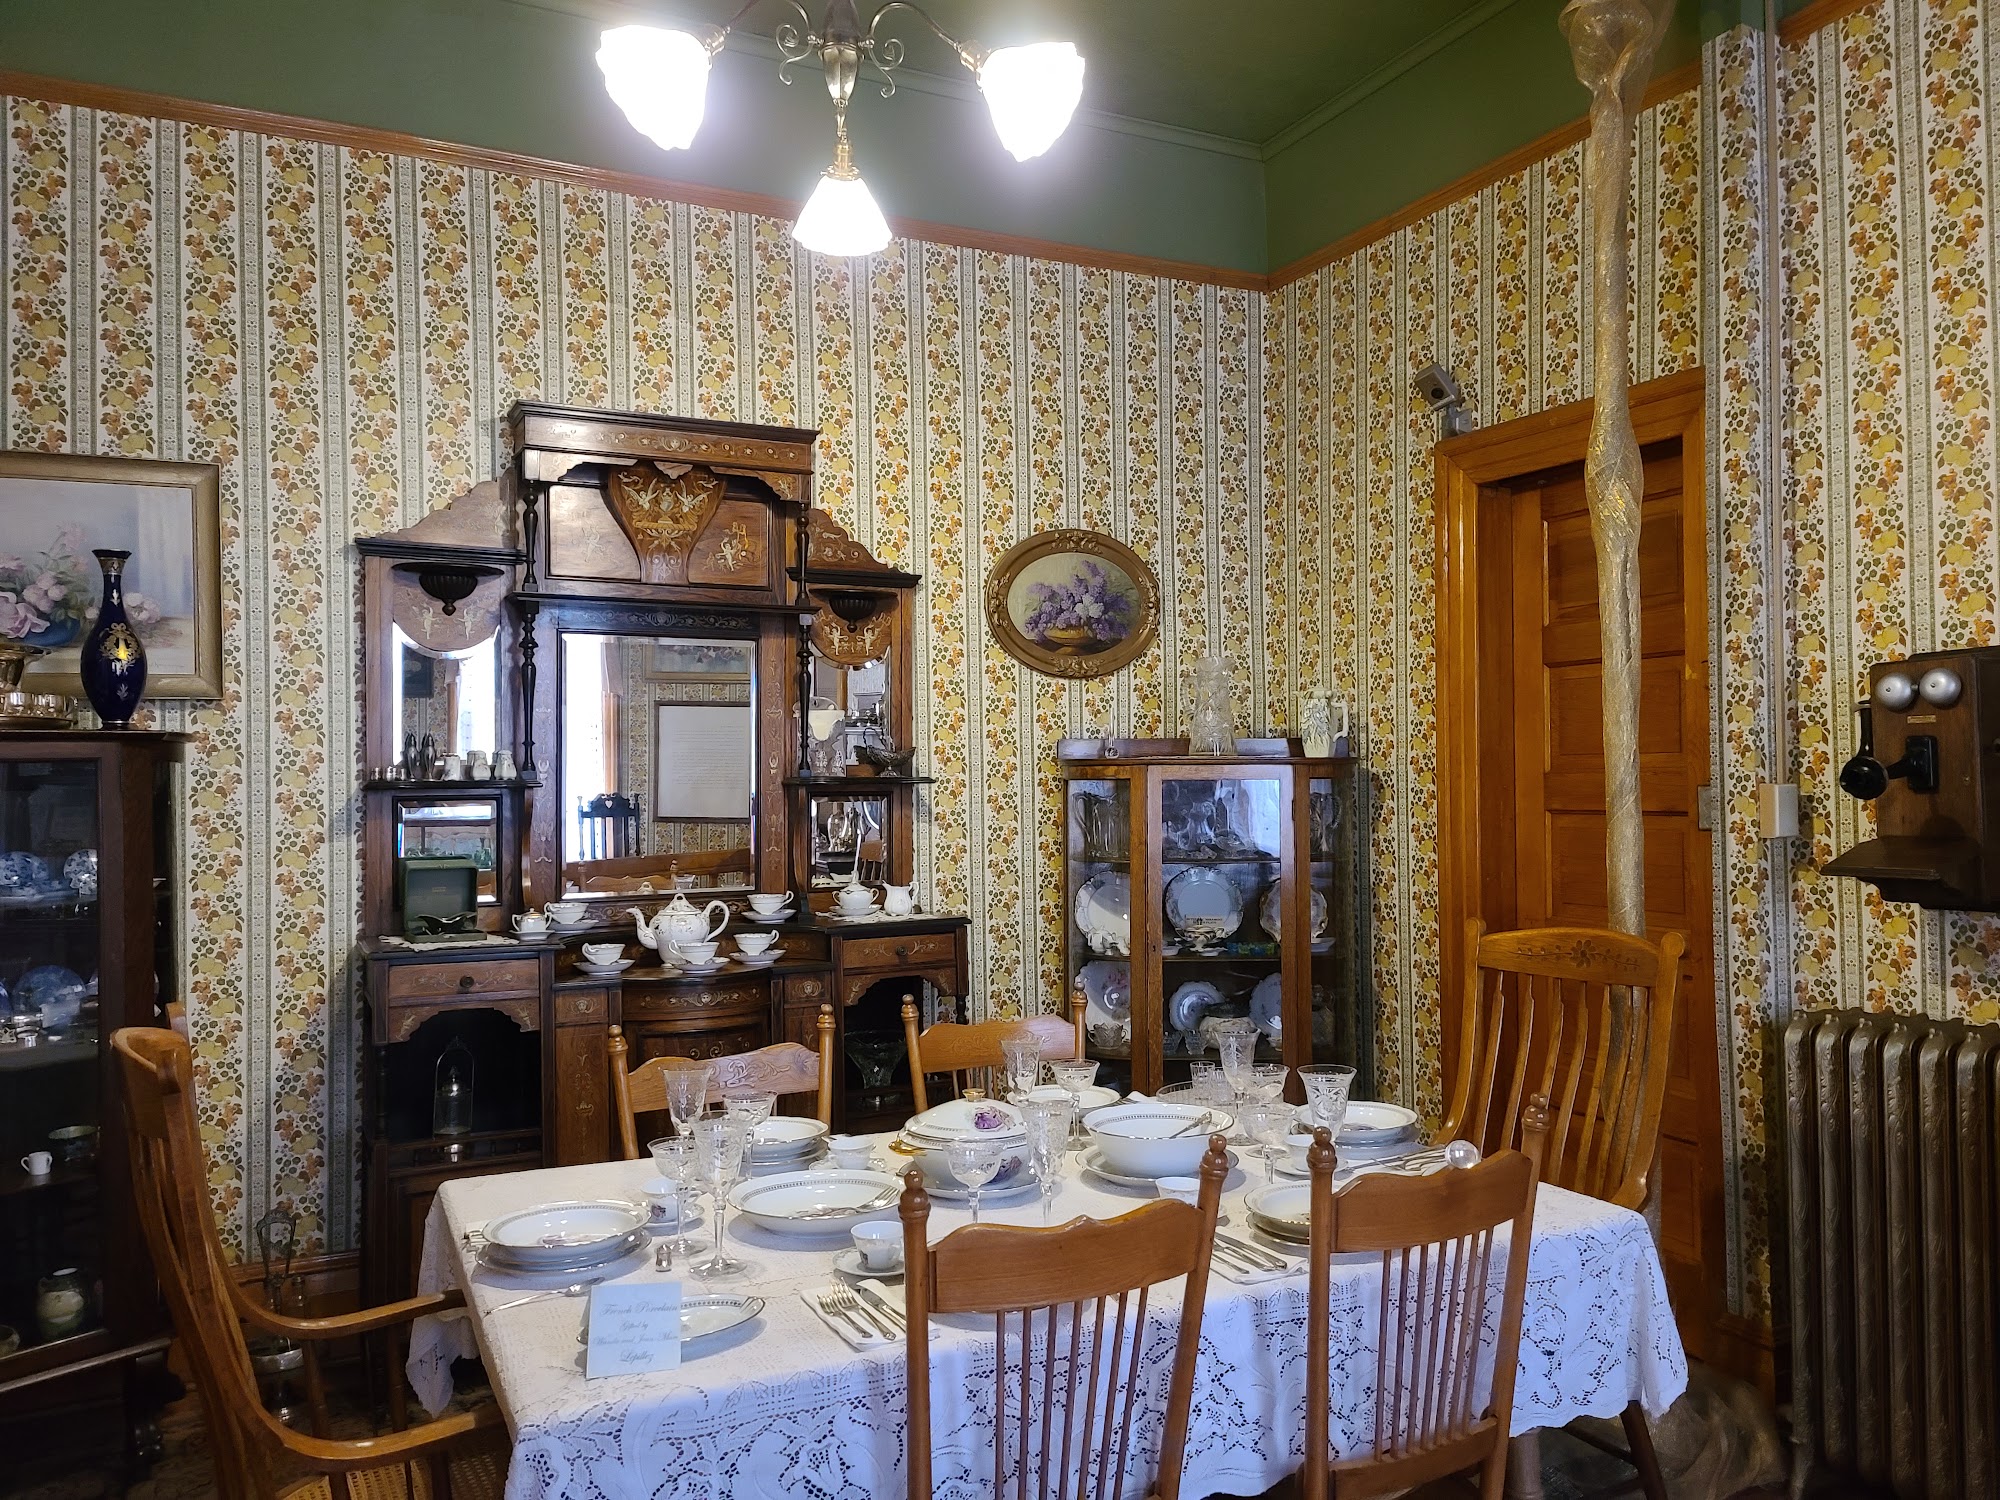 Miramont Castle Museum and The Queen's Parlour Tea Room